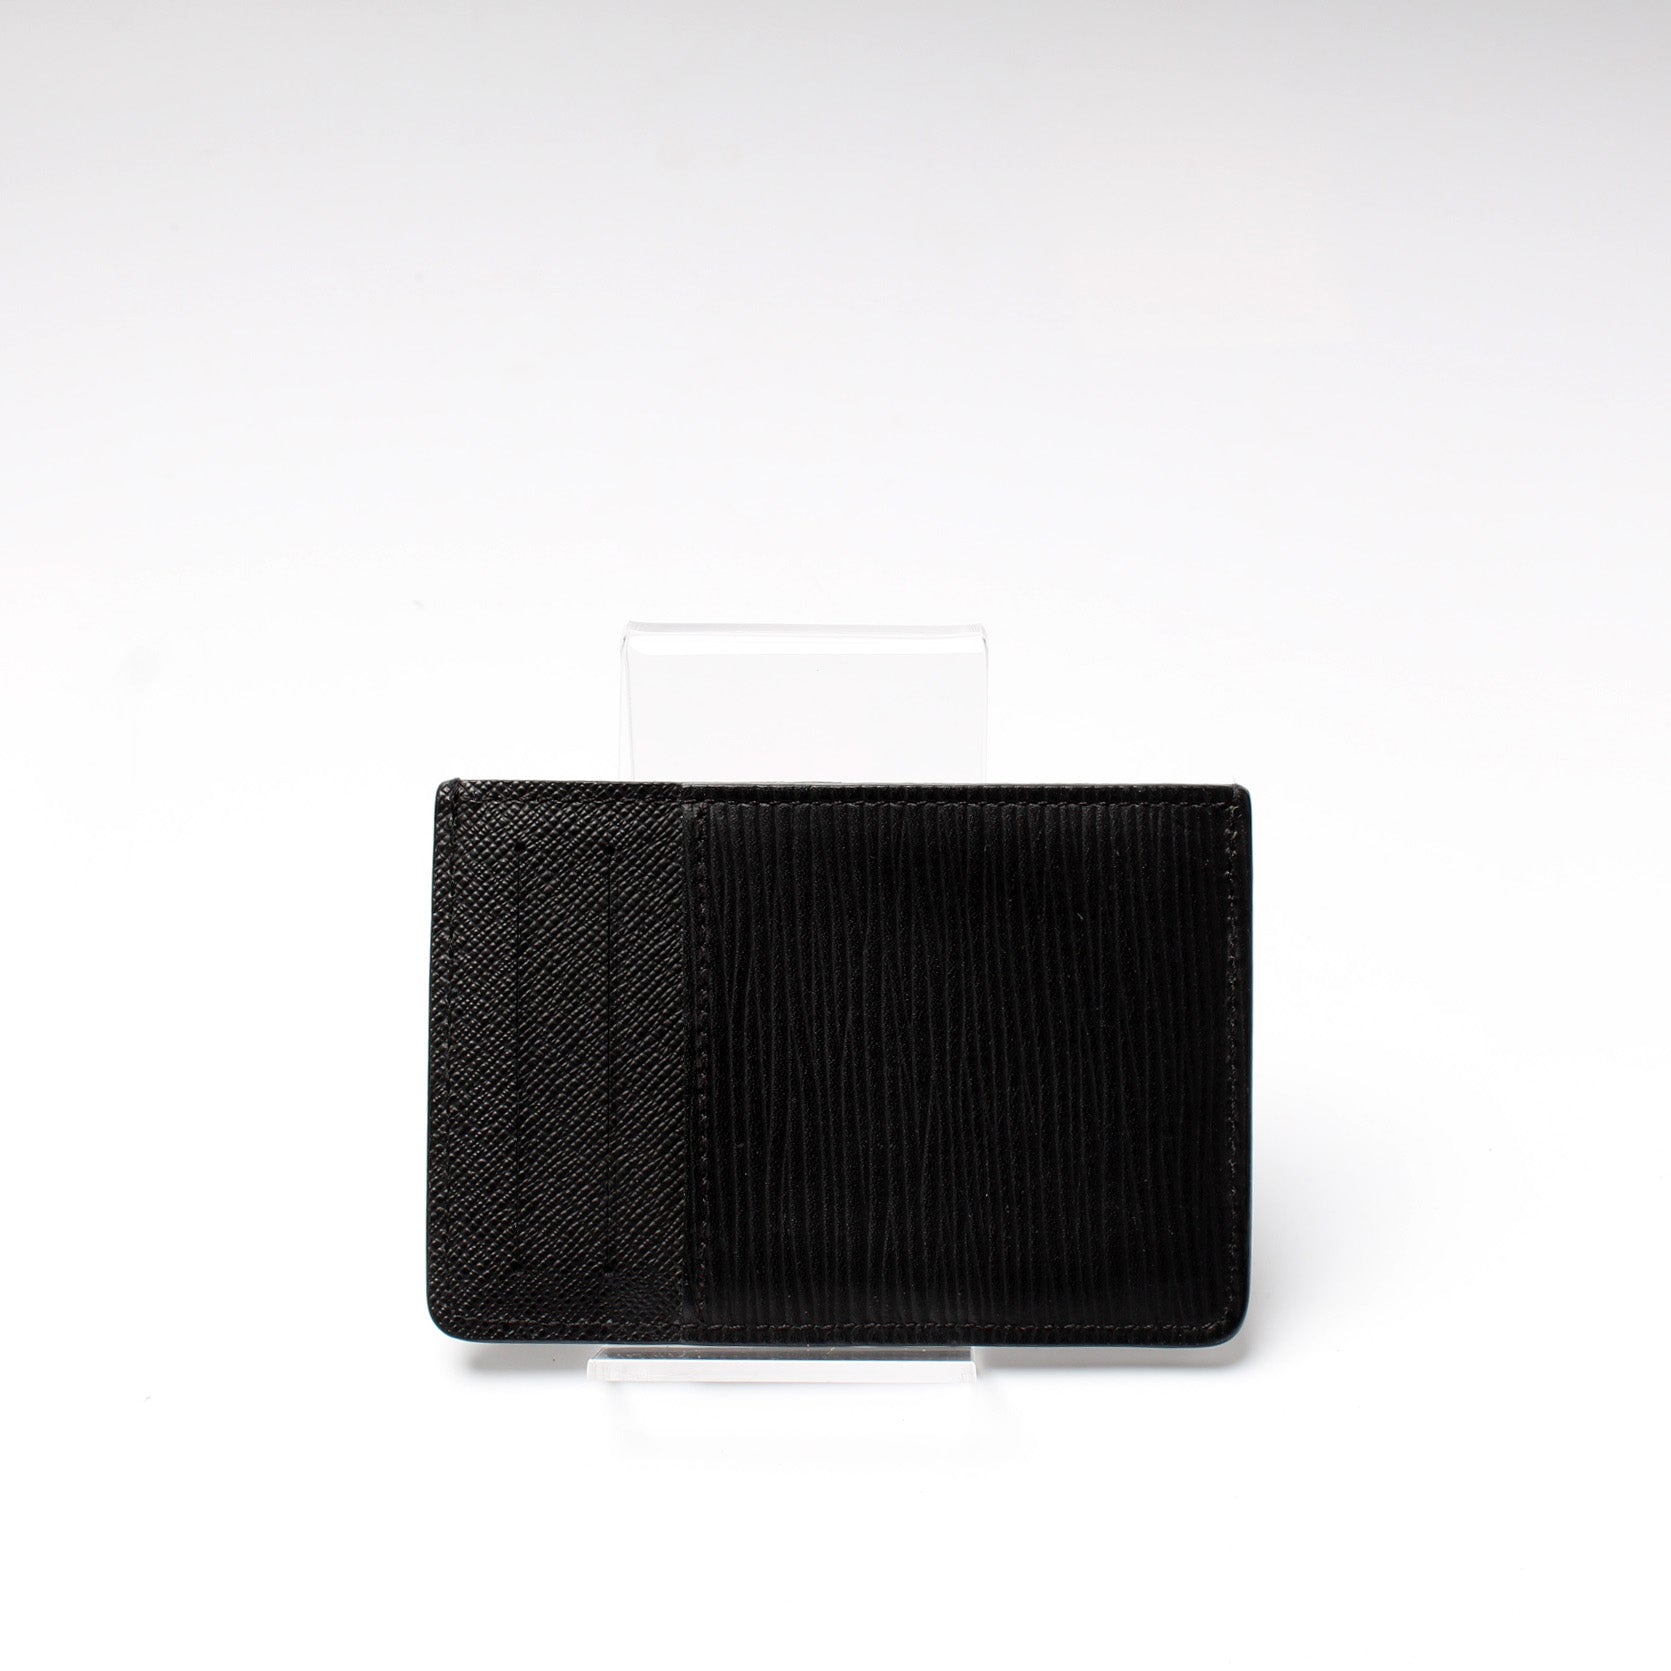 Neo Porte Cartes Epi Leather - Wallets and Small Leather Goods